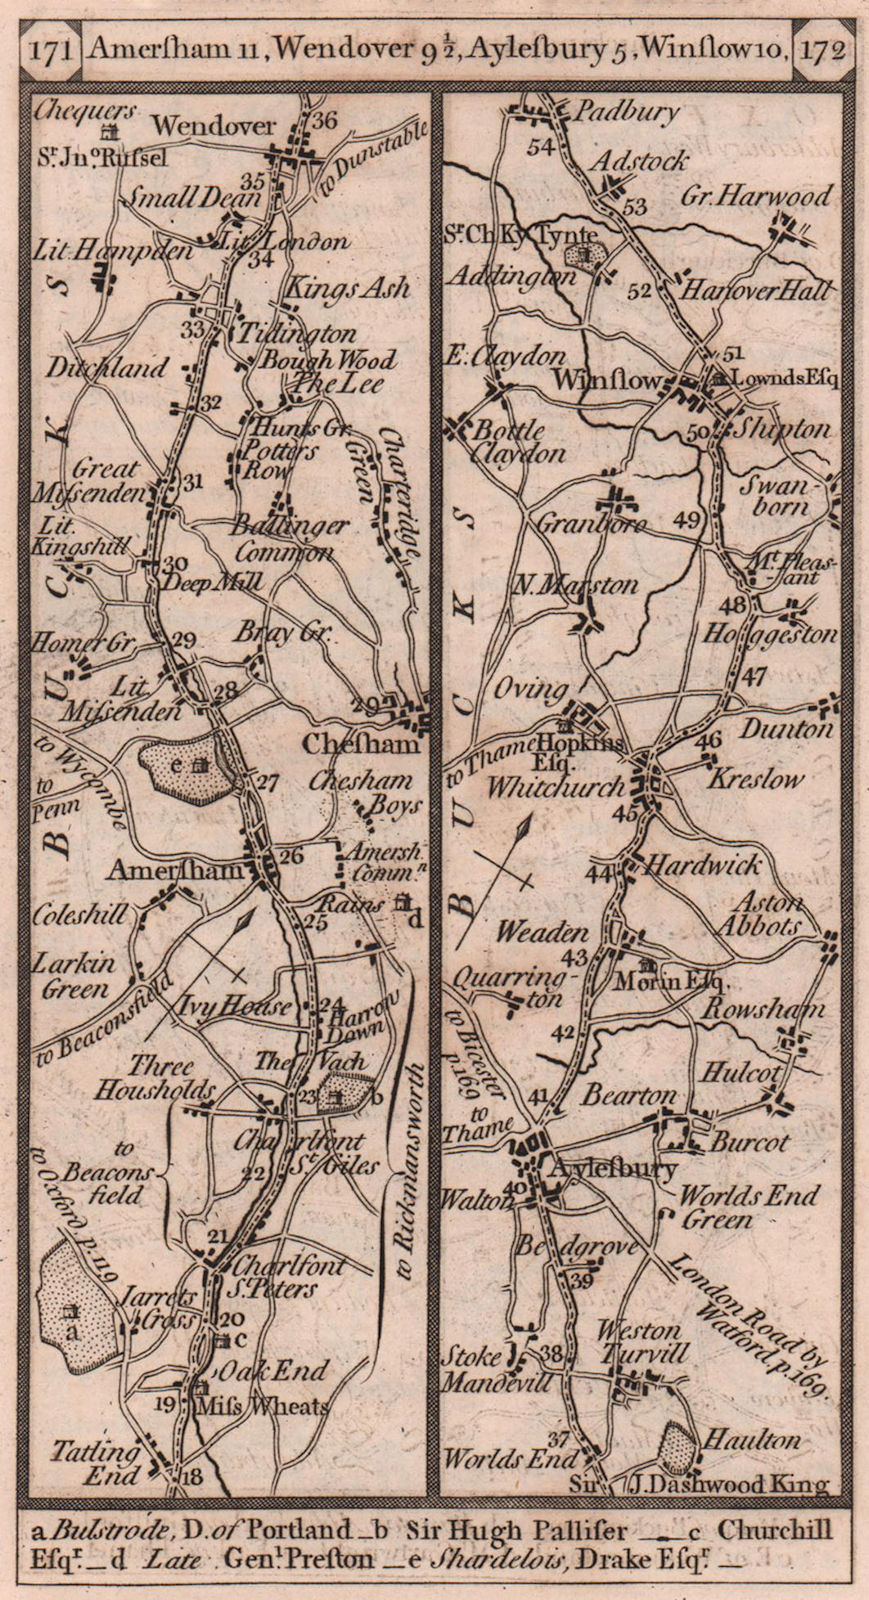 Chalfonts-Amersham-Wendover-Aylesbury-Winslow road strip map PATERSON 1803